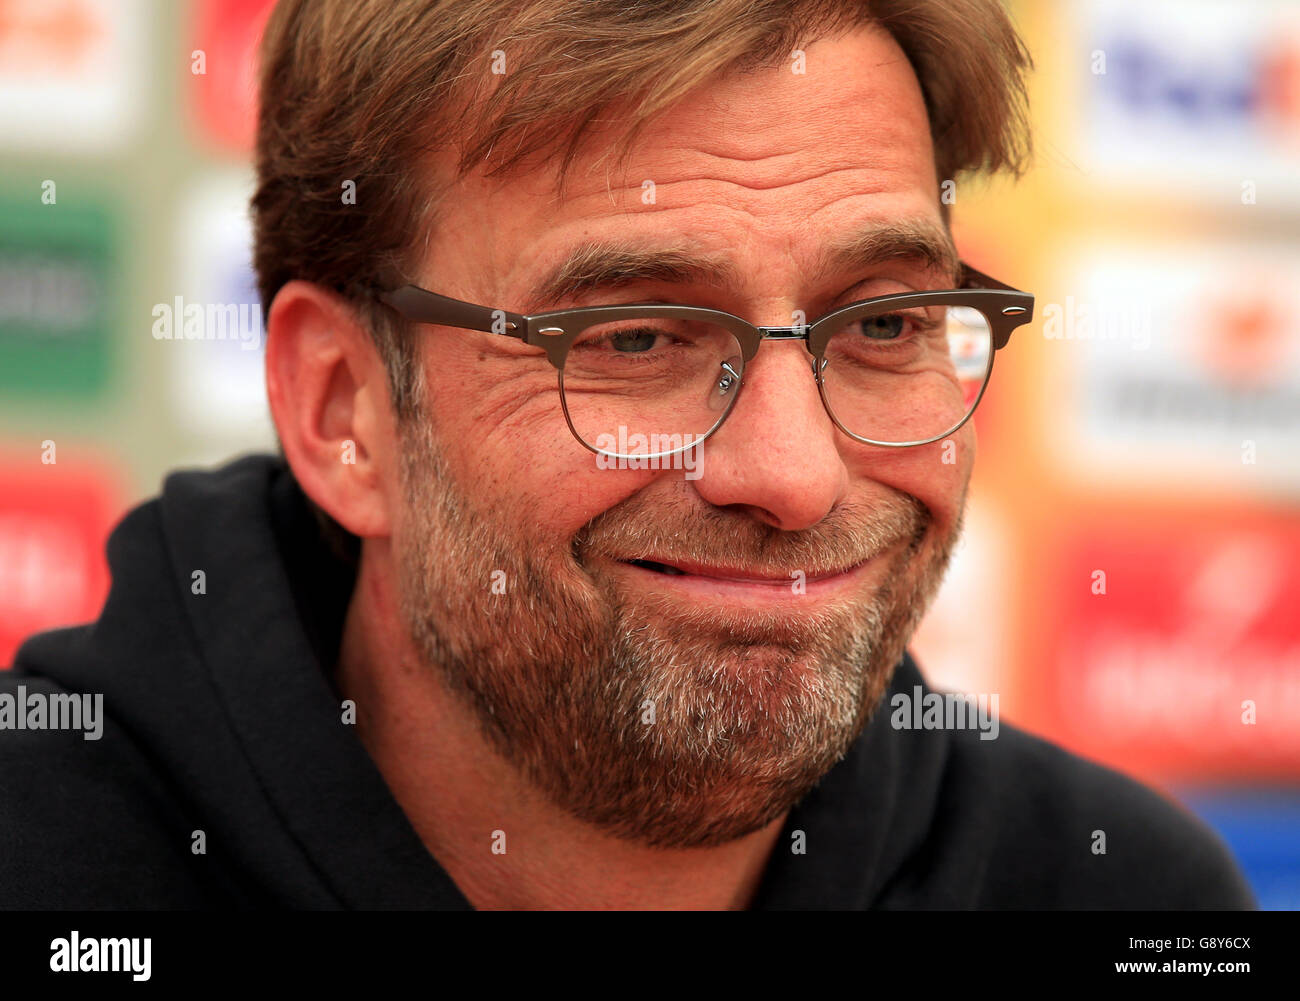 Liverpool manager Jurgen Klopp during a press conference at Melwood Training Ground, Liverpool. Stock Photo